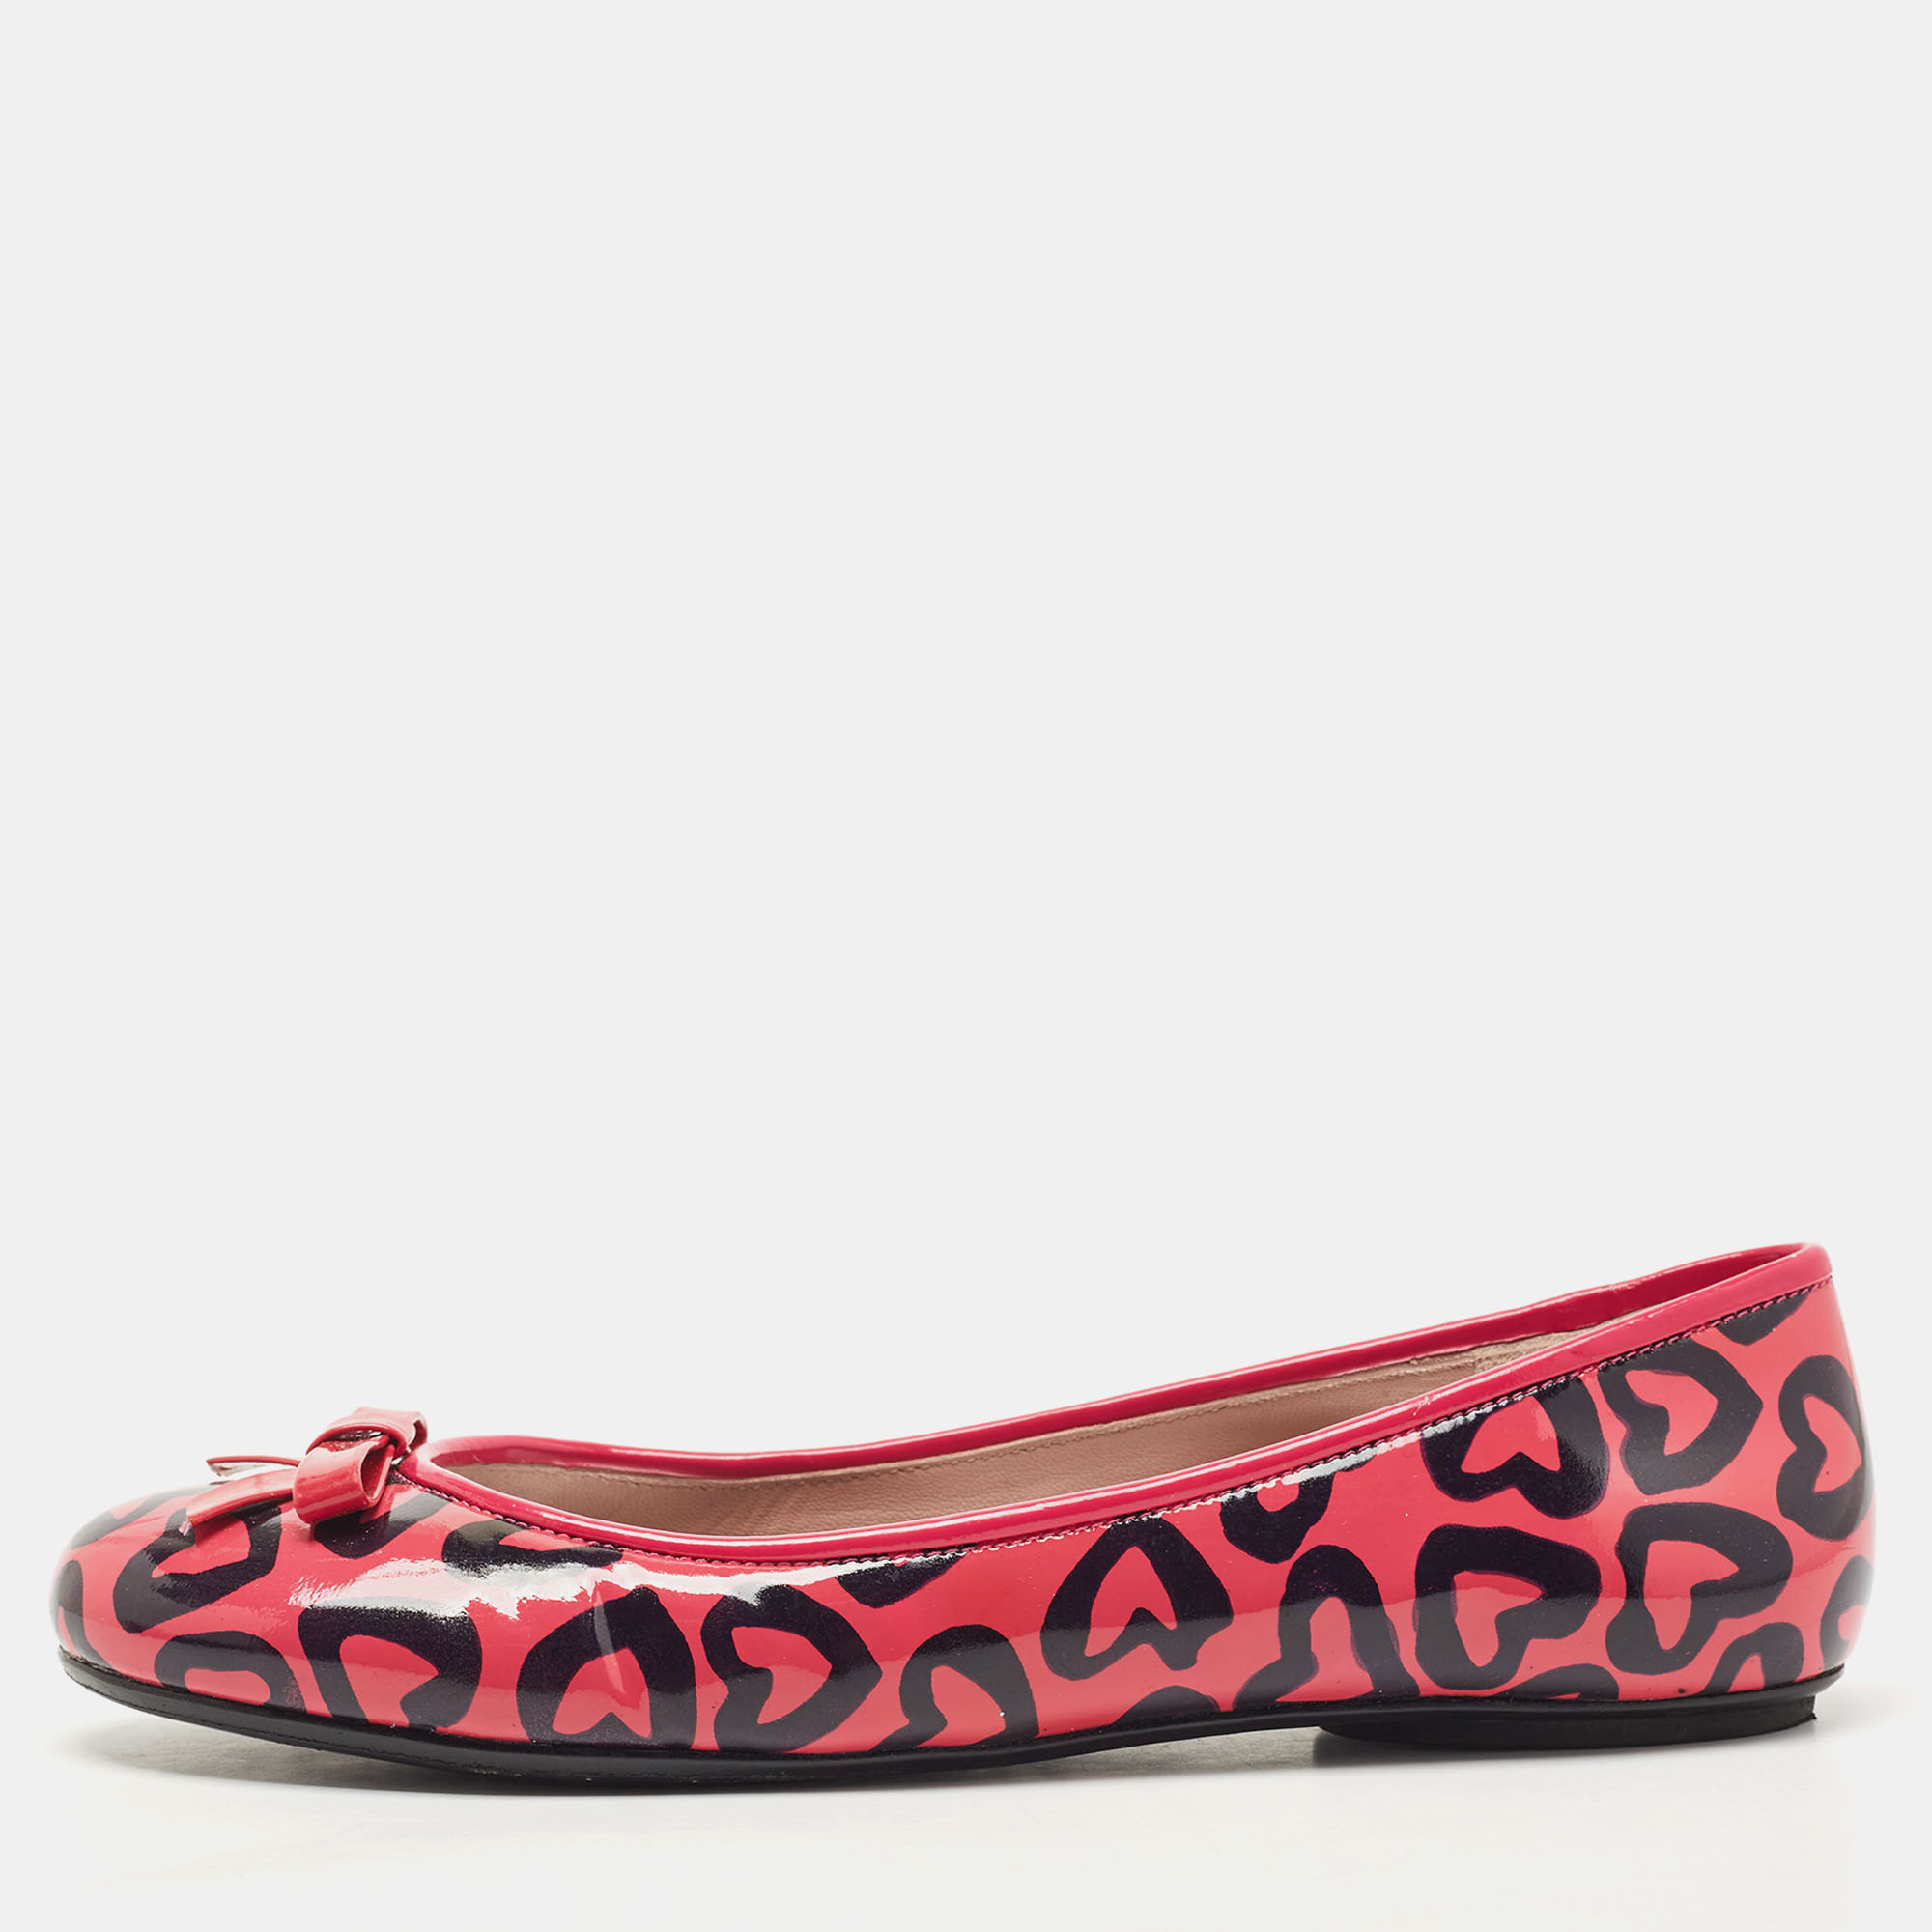 

Marc by Marc Jacobs Pink/Black Heart Patent Leather Bow Ballet Flats Size